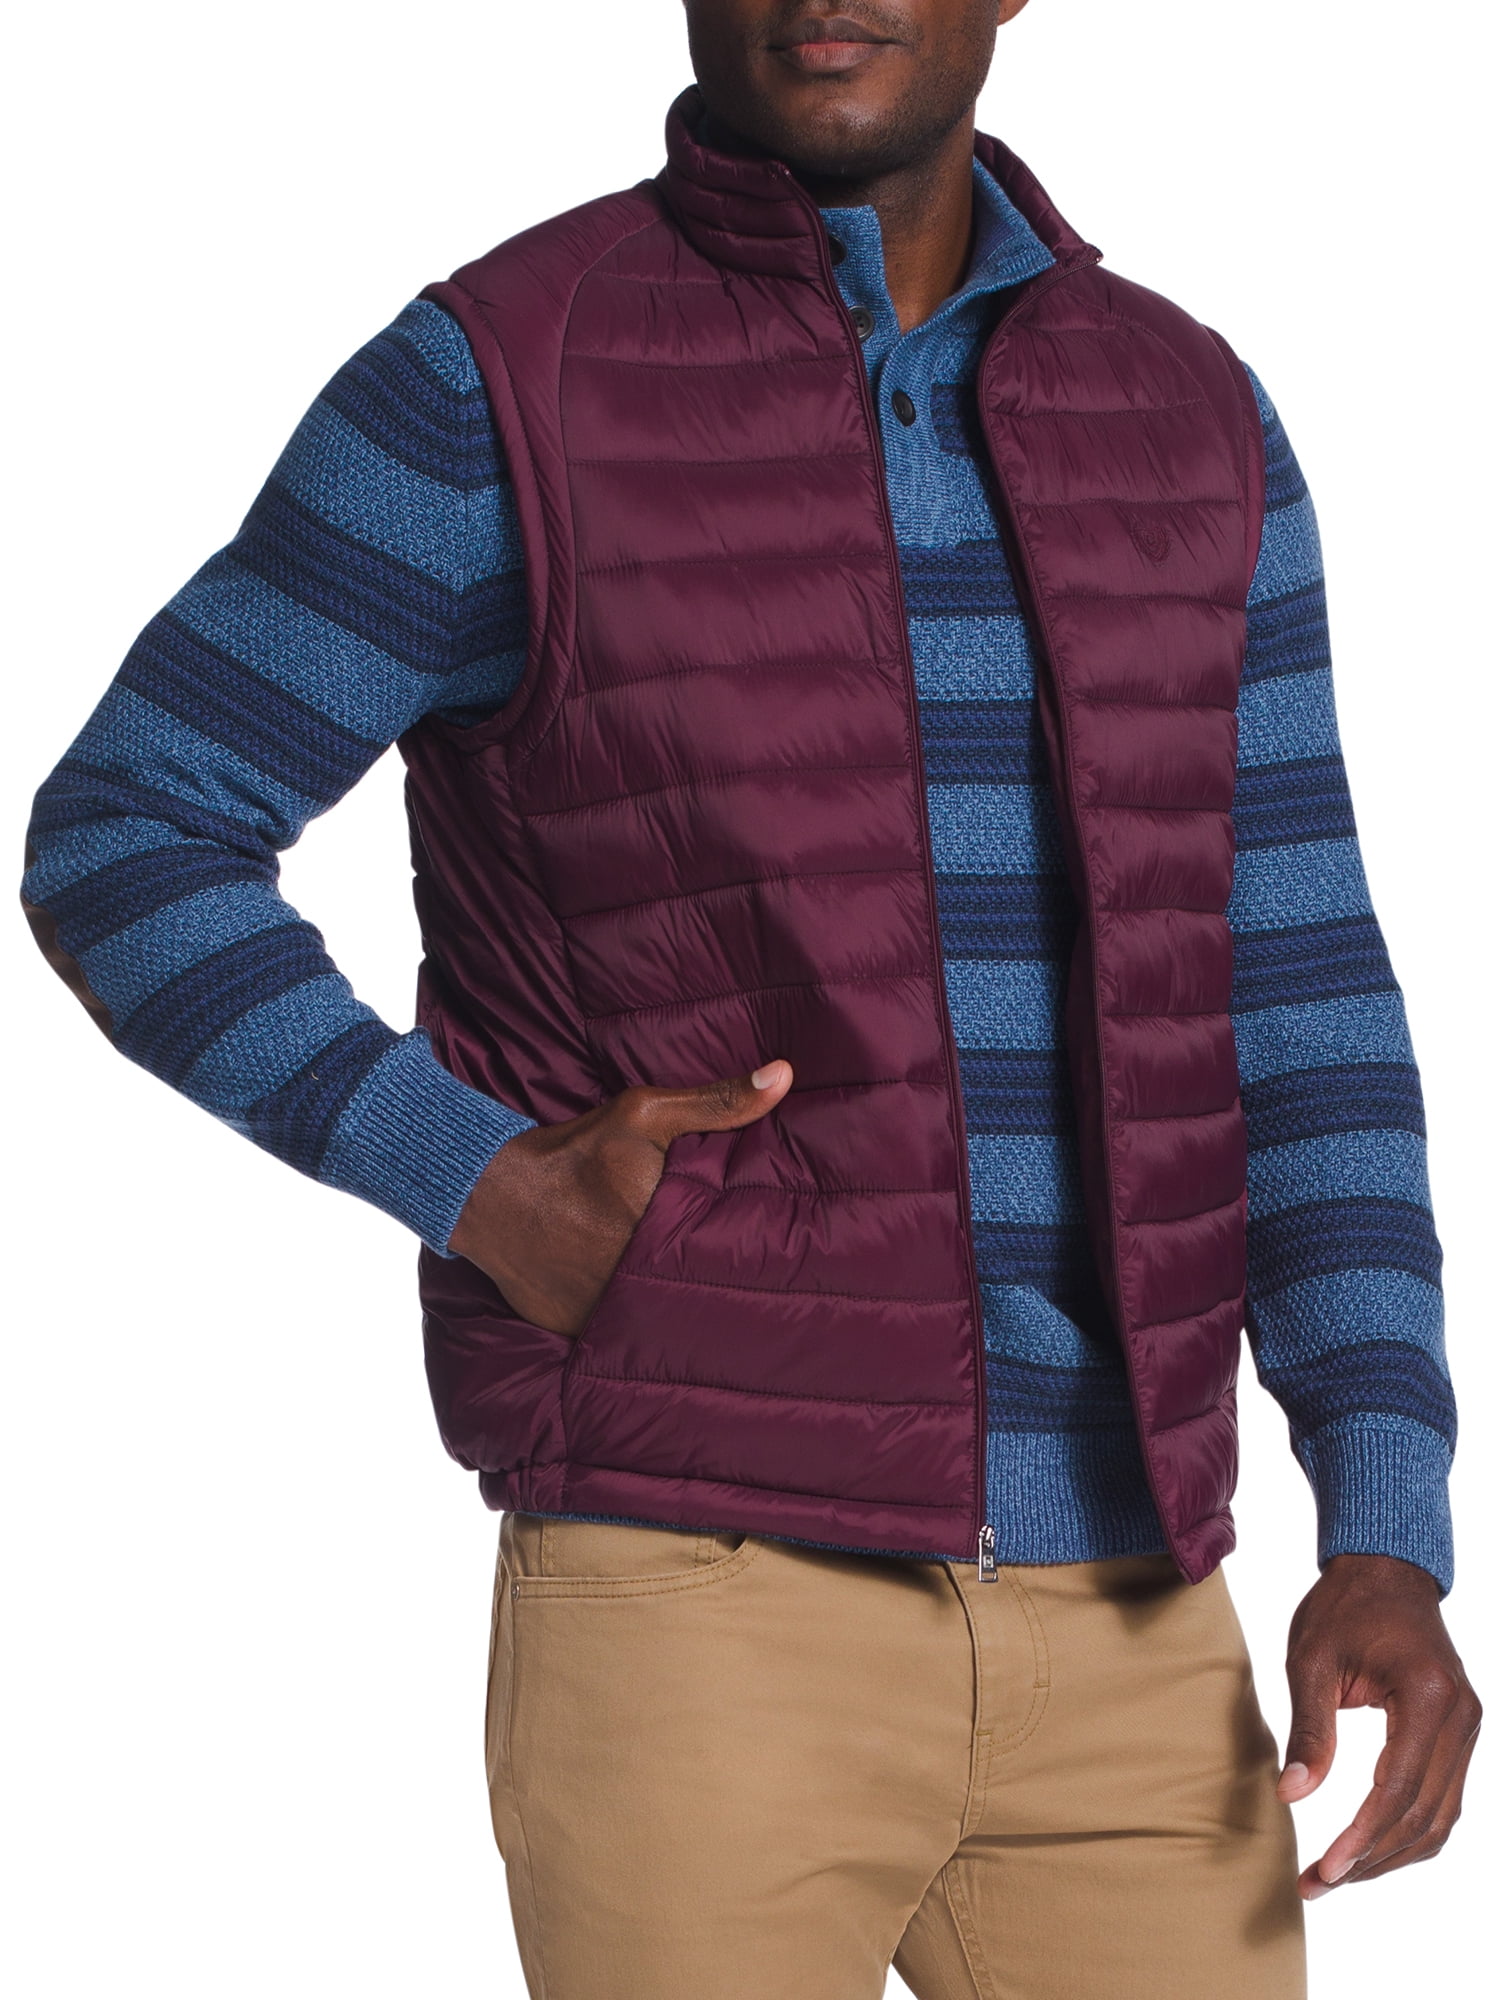 Chaps mens Big and Tall Packable Quilted Vest 